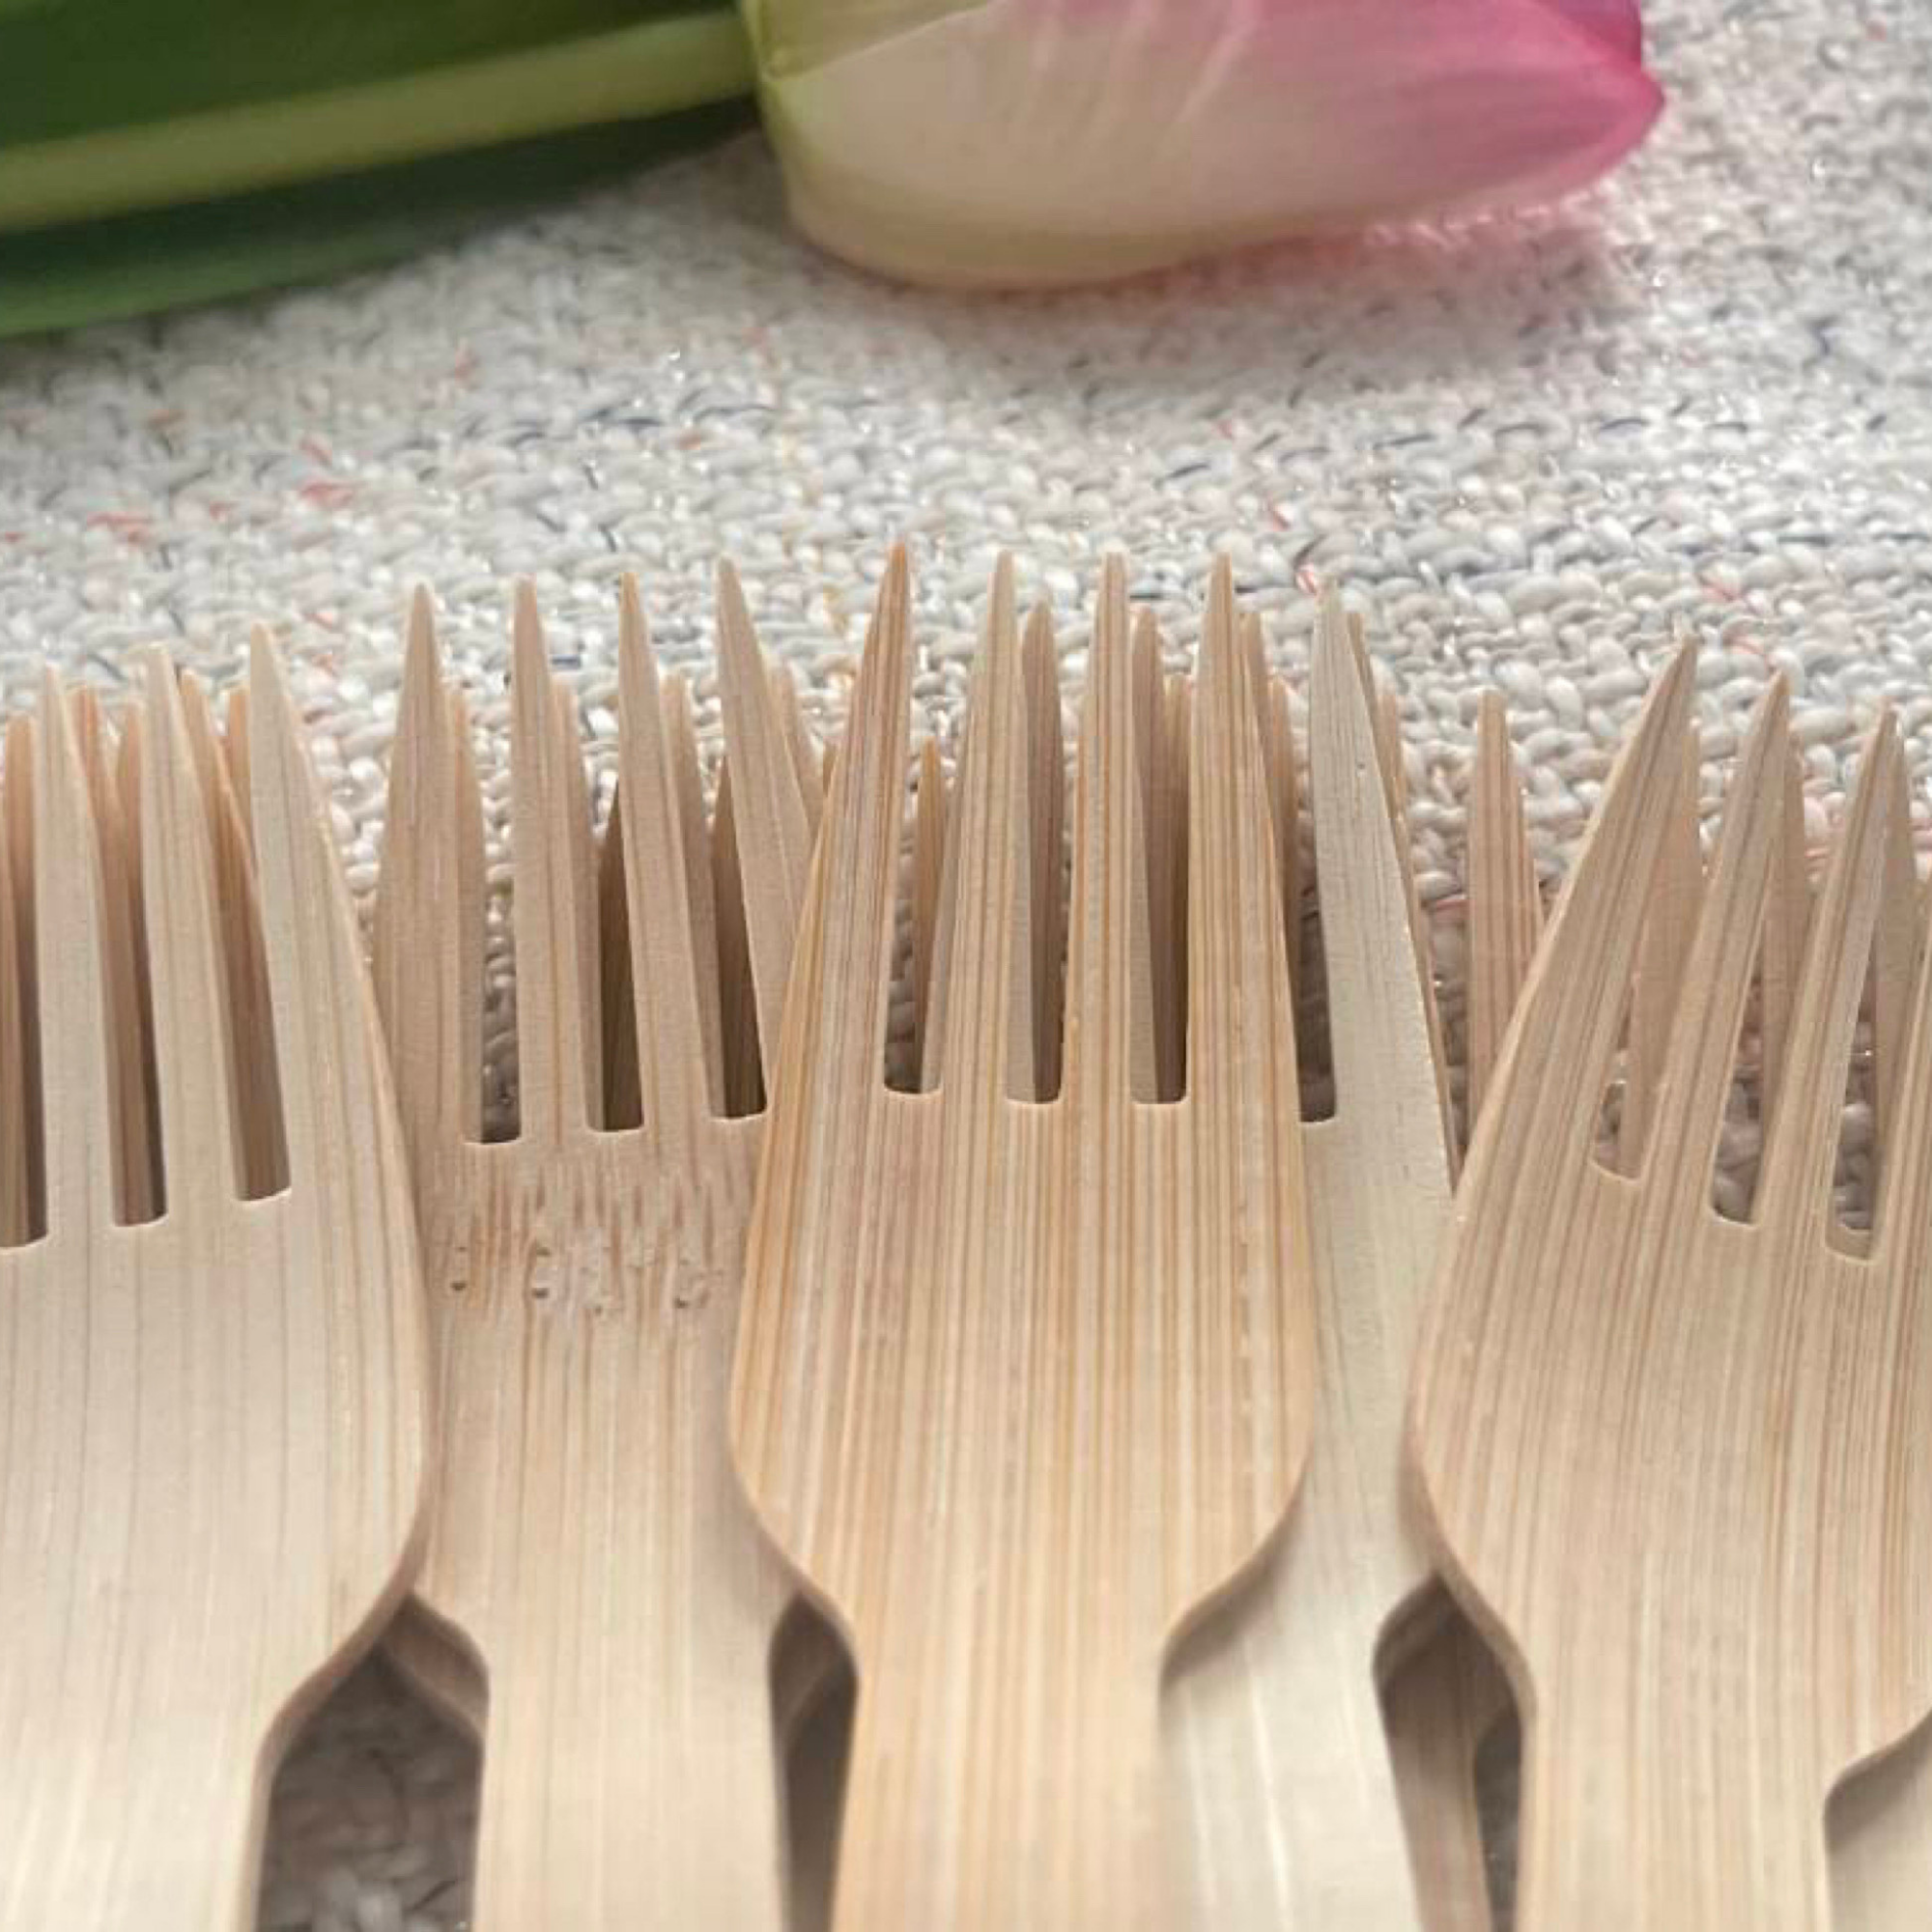 Close-up of Holy City Straw Co. bamboo forks, showcasing the finely detailed tines and natural wood texture. The forks are grouped together on a textured fabric, with a soft-focus view of a pink tulip and fresh produce in the background, highlighting the brand's commitment to nature and sustainability.